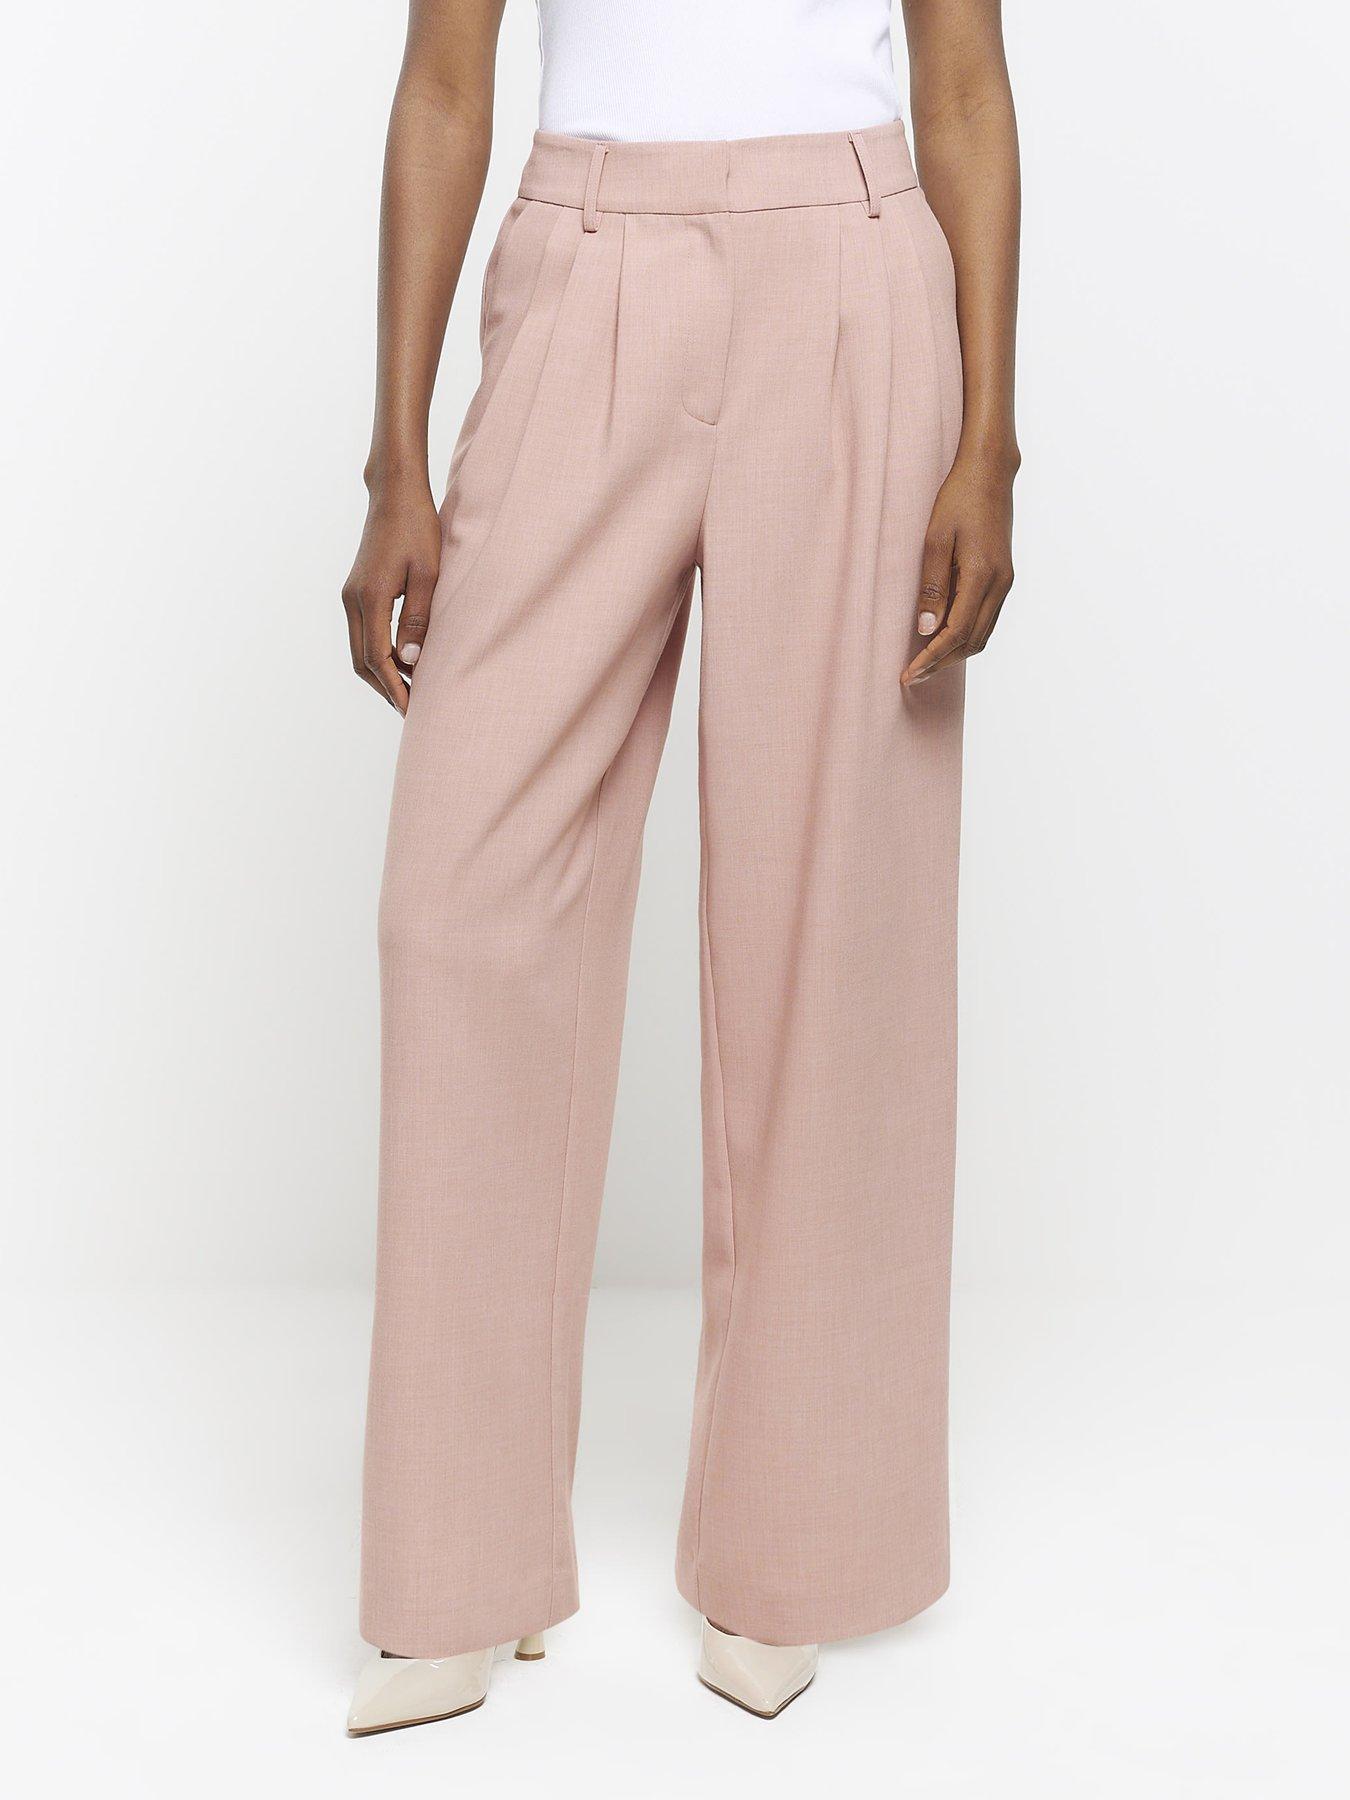 Tall Pink Trousers